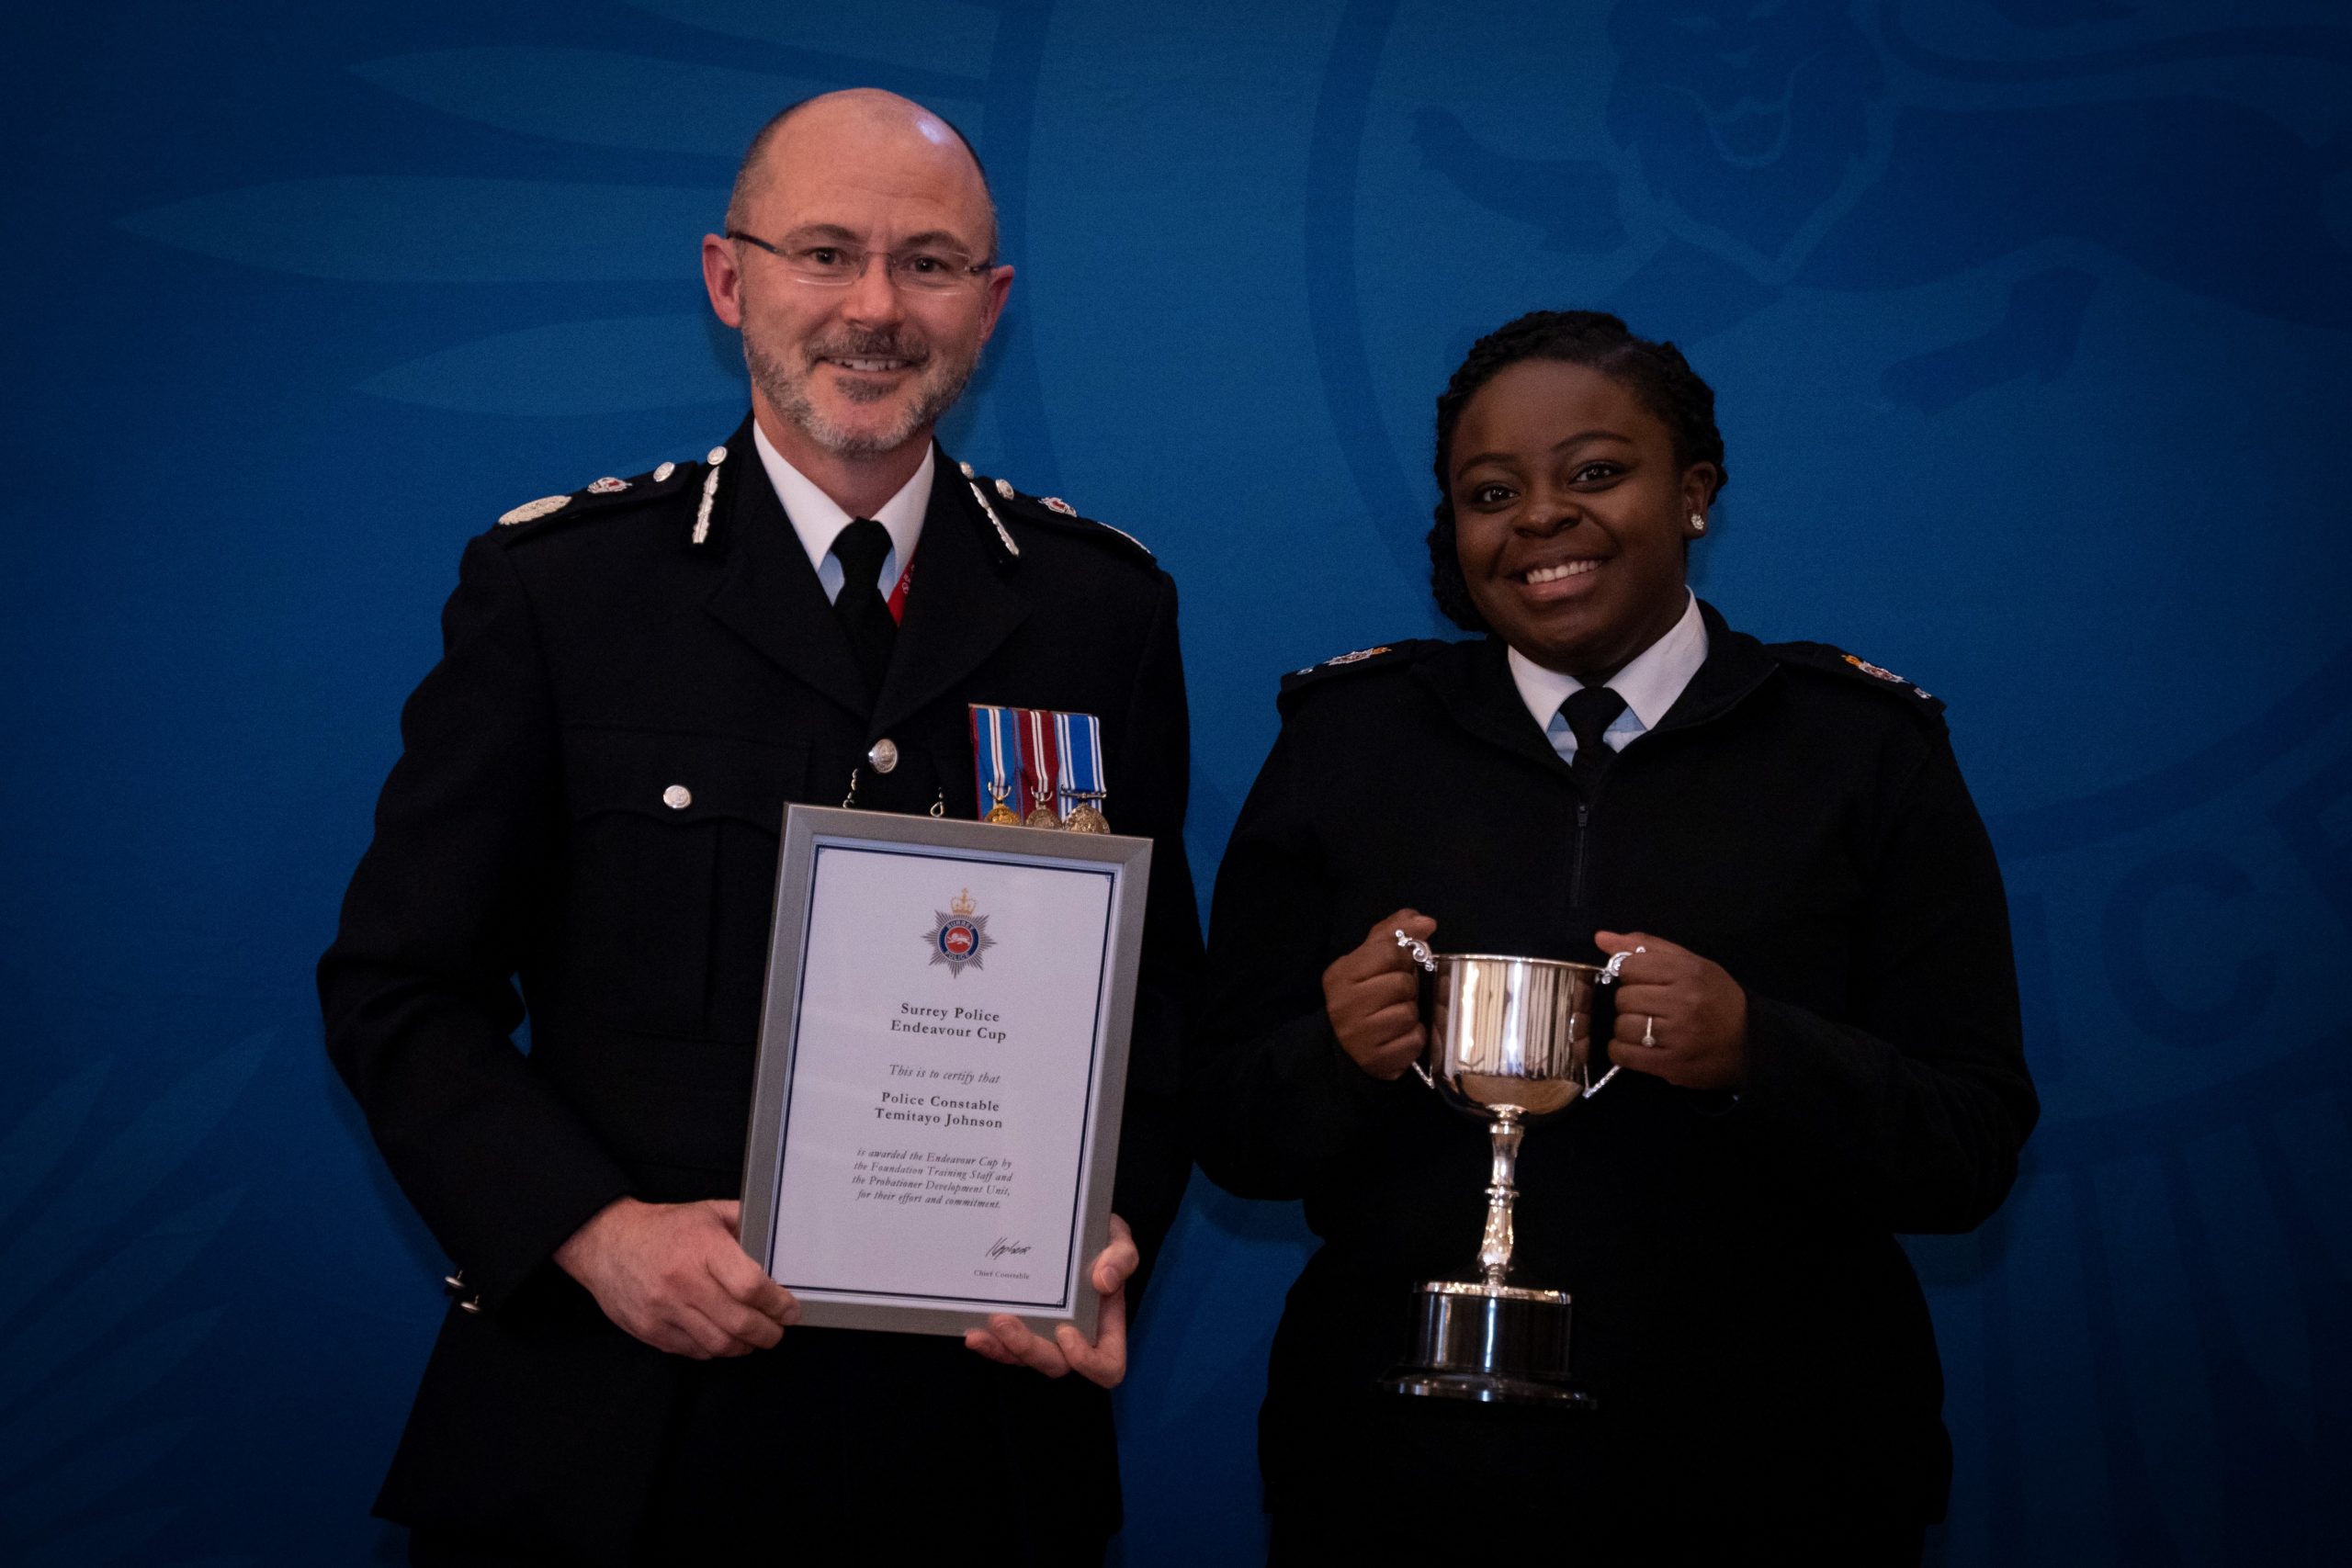 Chief Constable Gavin Stephens and PC Johnson